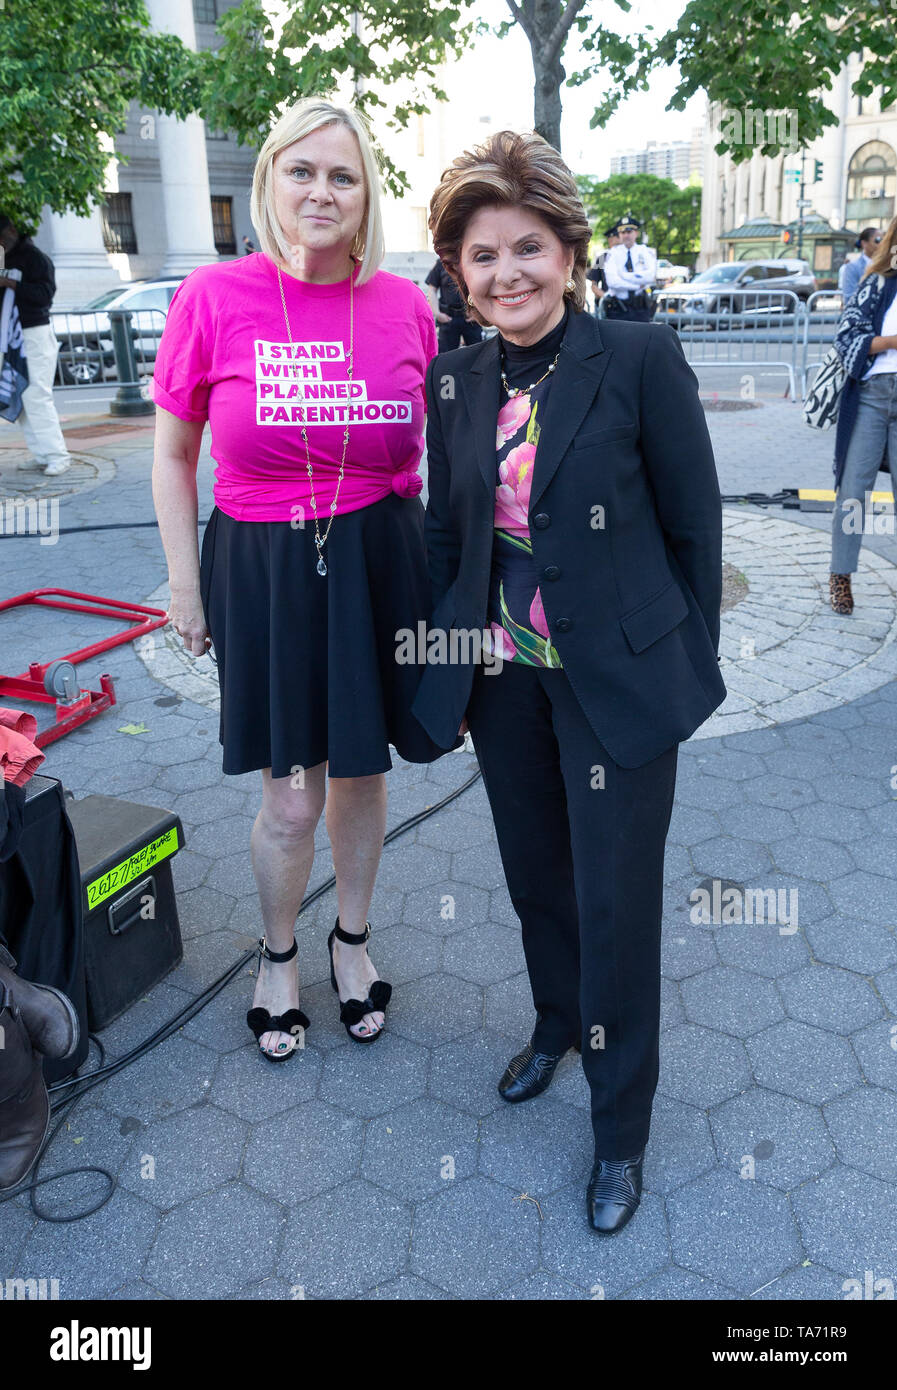 New York, United States. 21st May, 2019. Laura McQuade and attorney Gloria Allred attend pro-choice rally for women rights organized by Planned Parenthood on Foley Square Credit: Lev Radin/Pacific Press/Alamy Live News Stock Photo